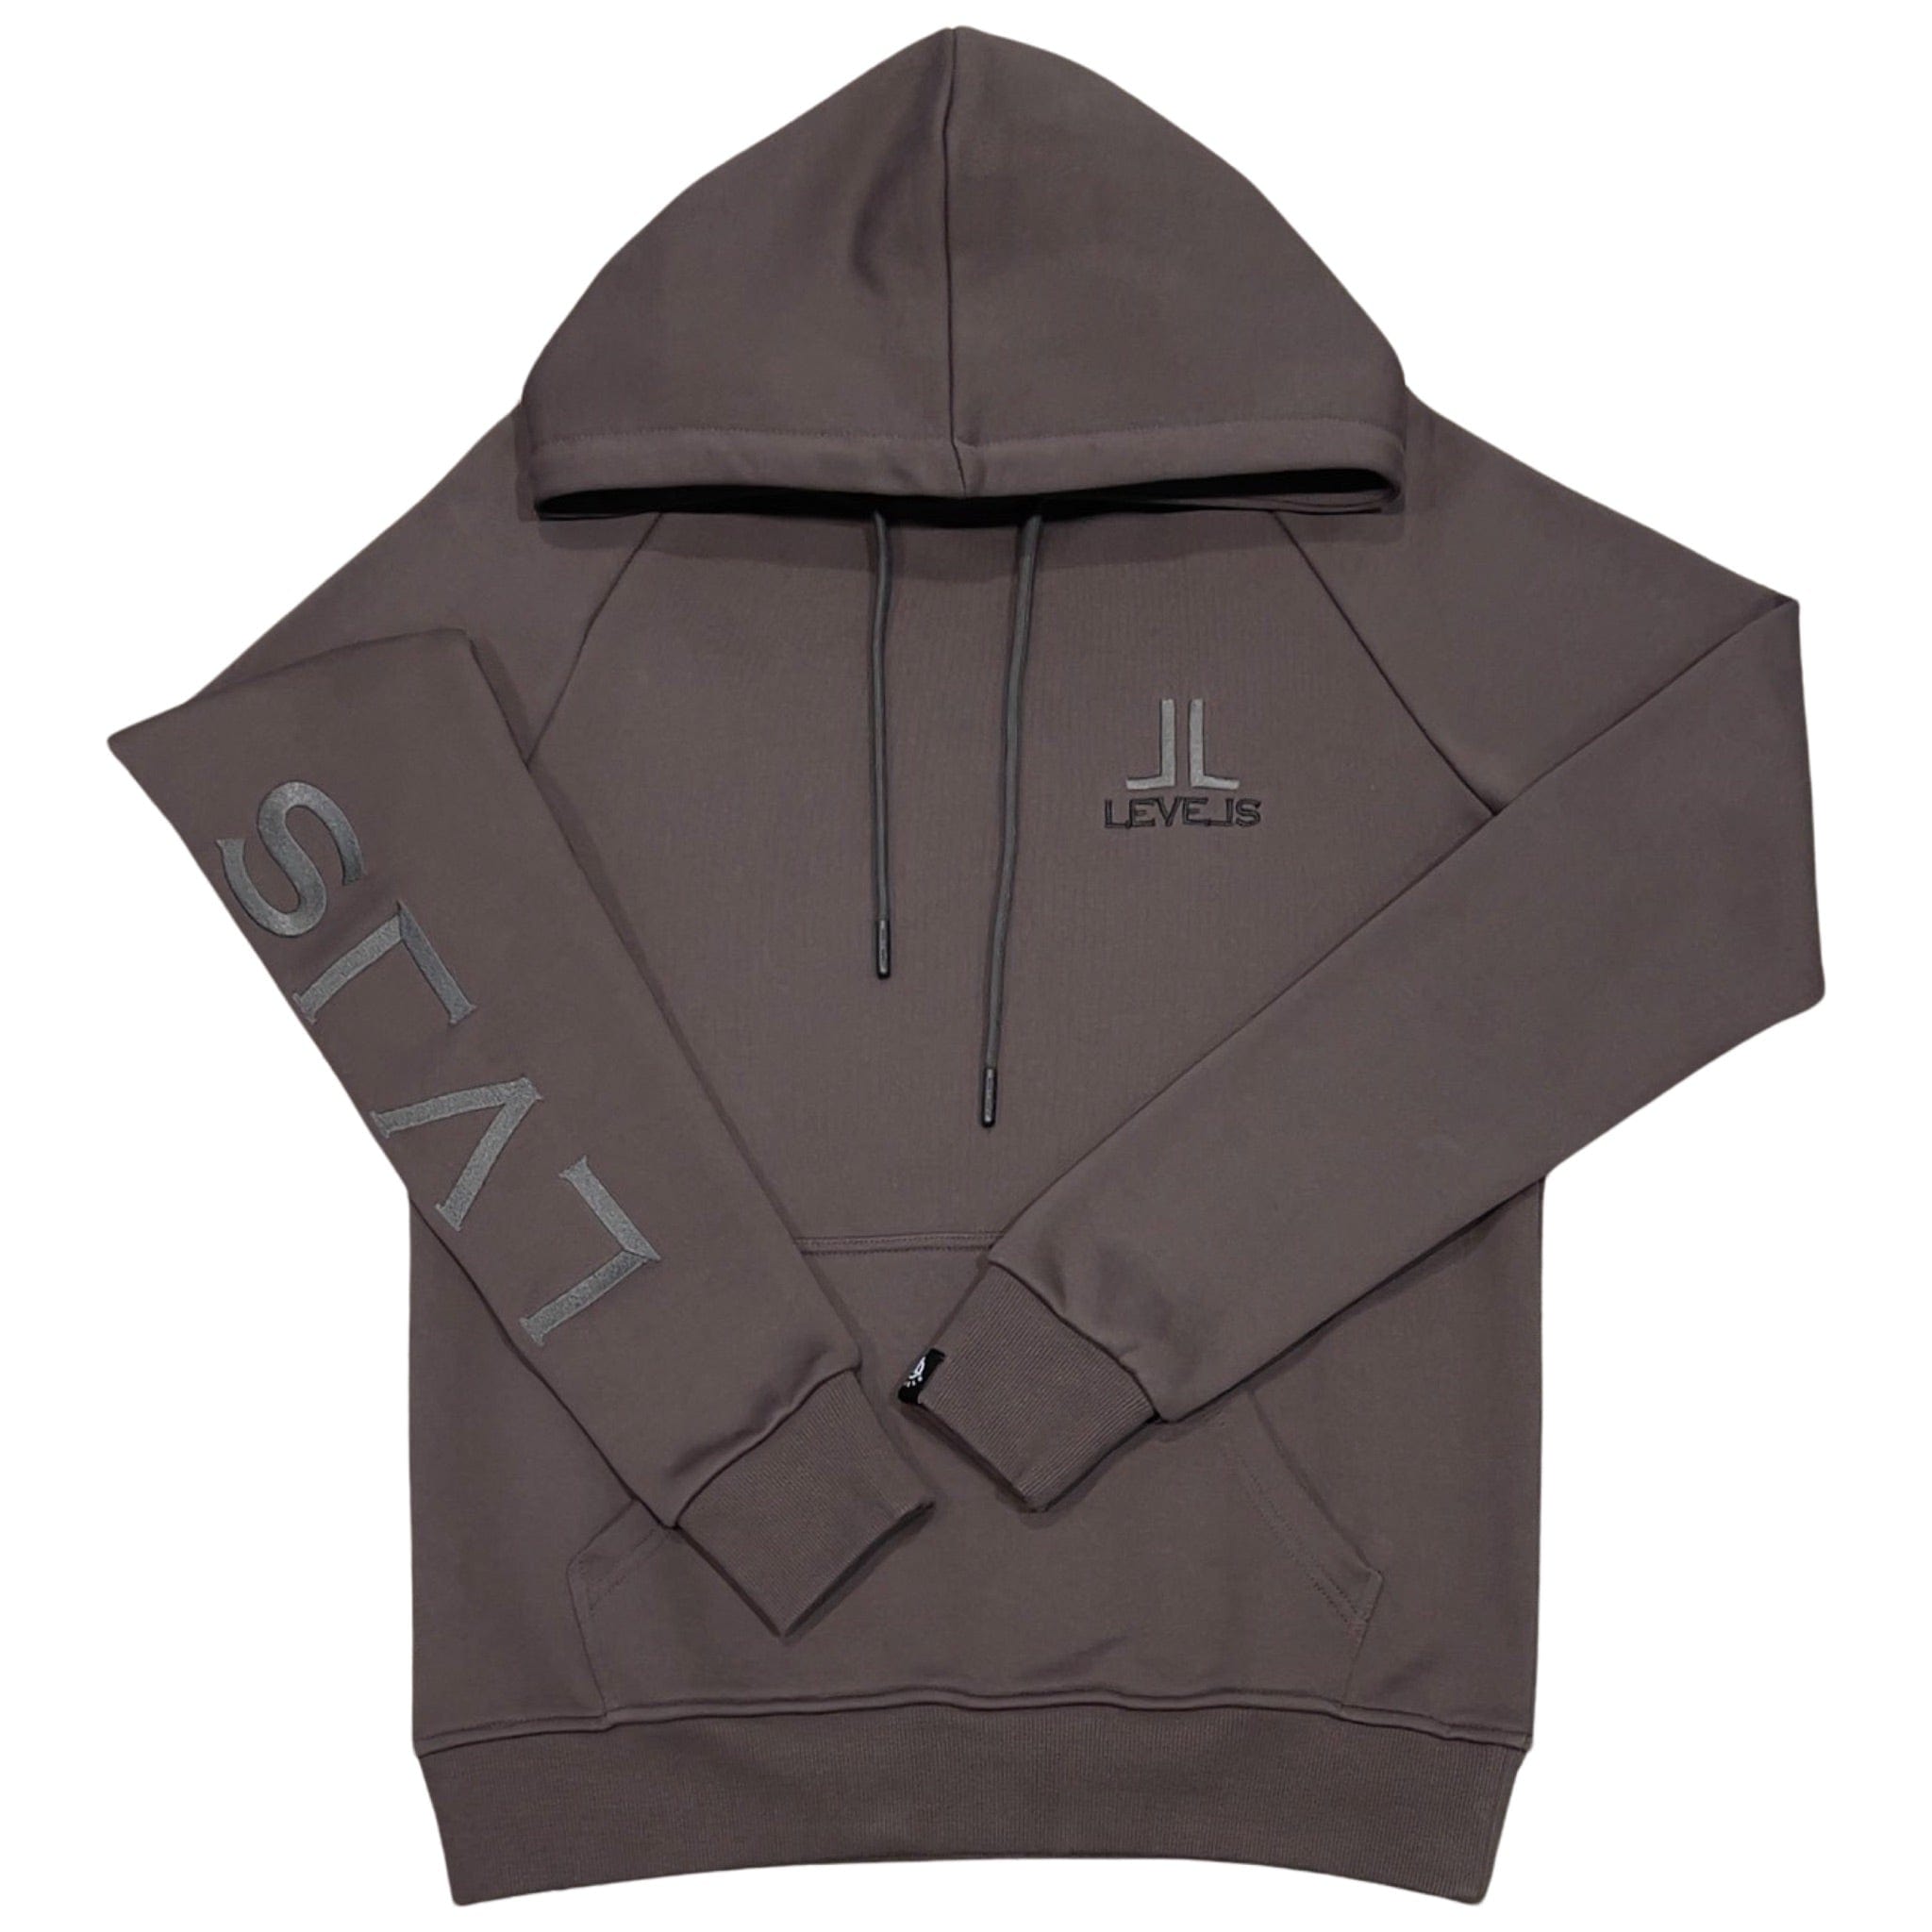 LEVELS, LLC Apparel & Accessories LUXE LVLS EMBROIDERED HOODIE | GREY